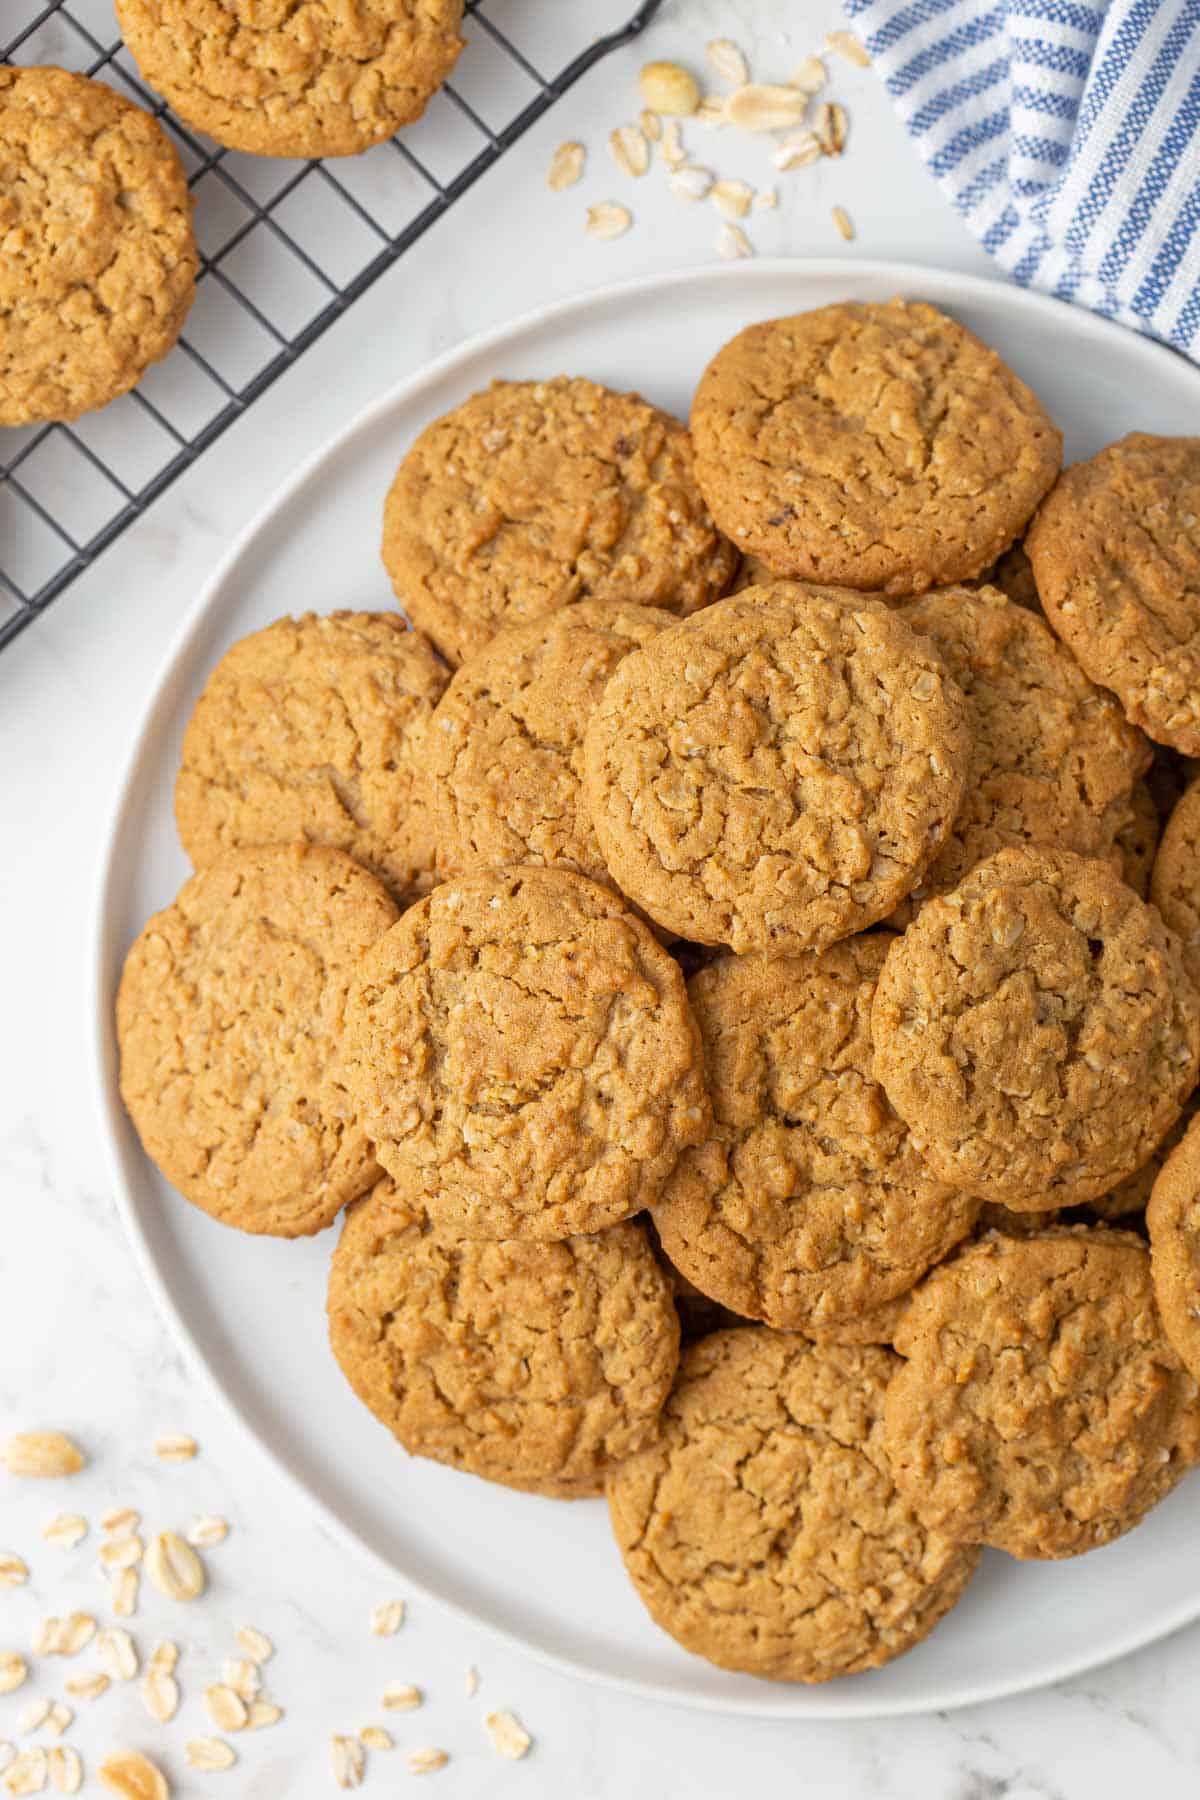 Overhead view of a white plate of oatmeal peanut butter cookies.